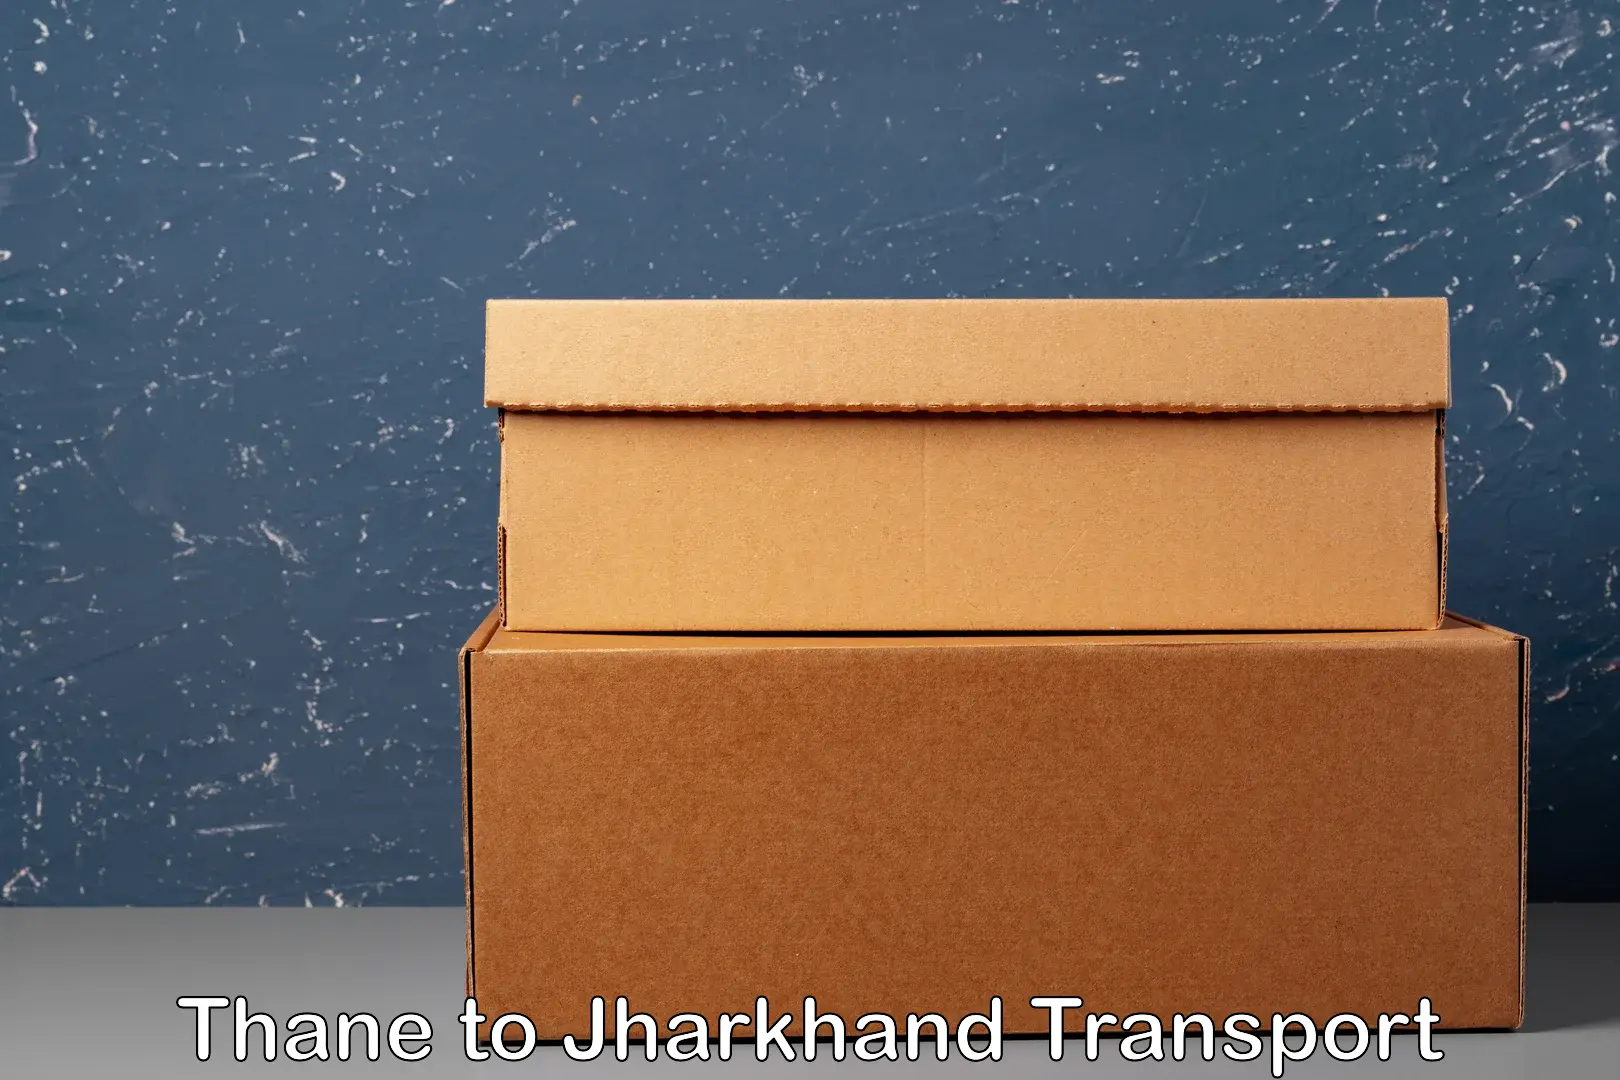 Air freight transport services Thane to Jharkhand